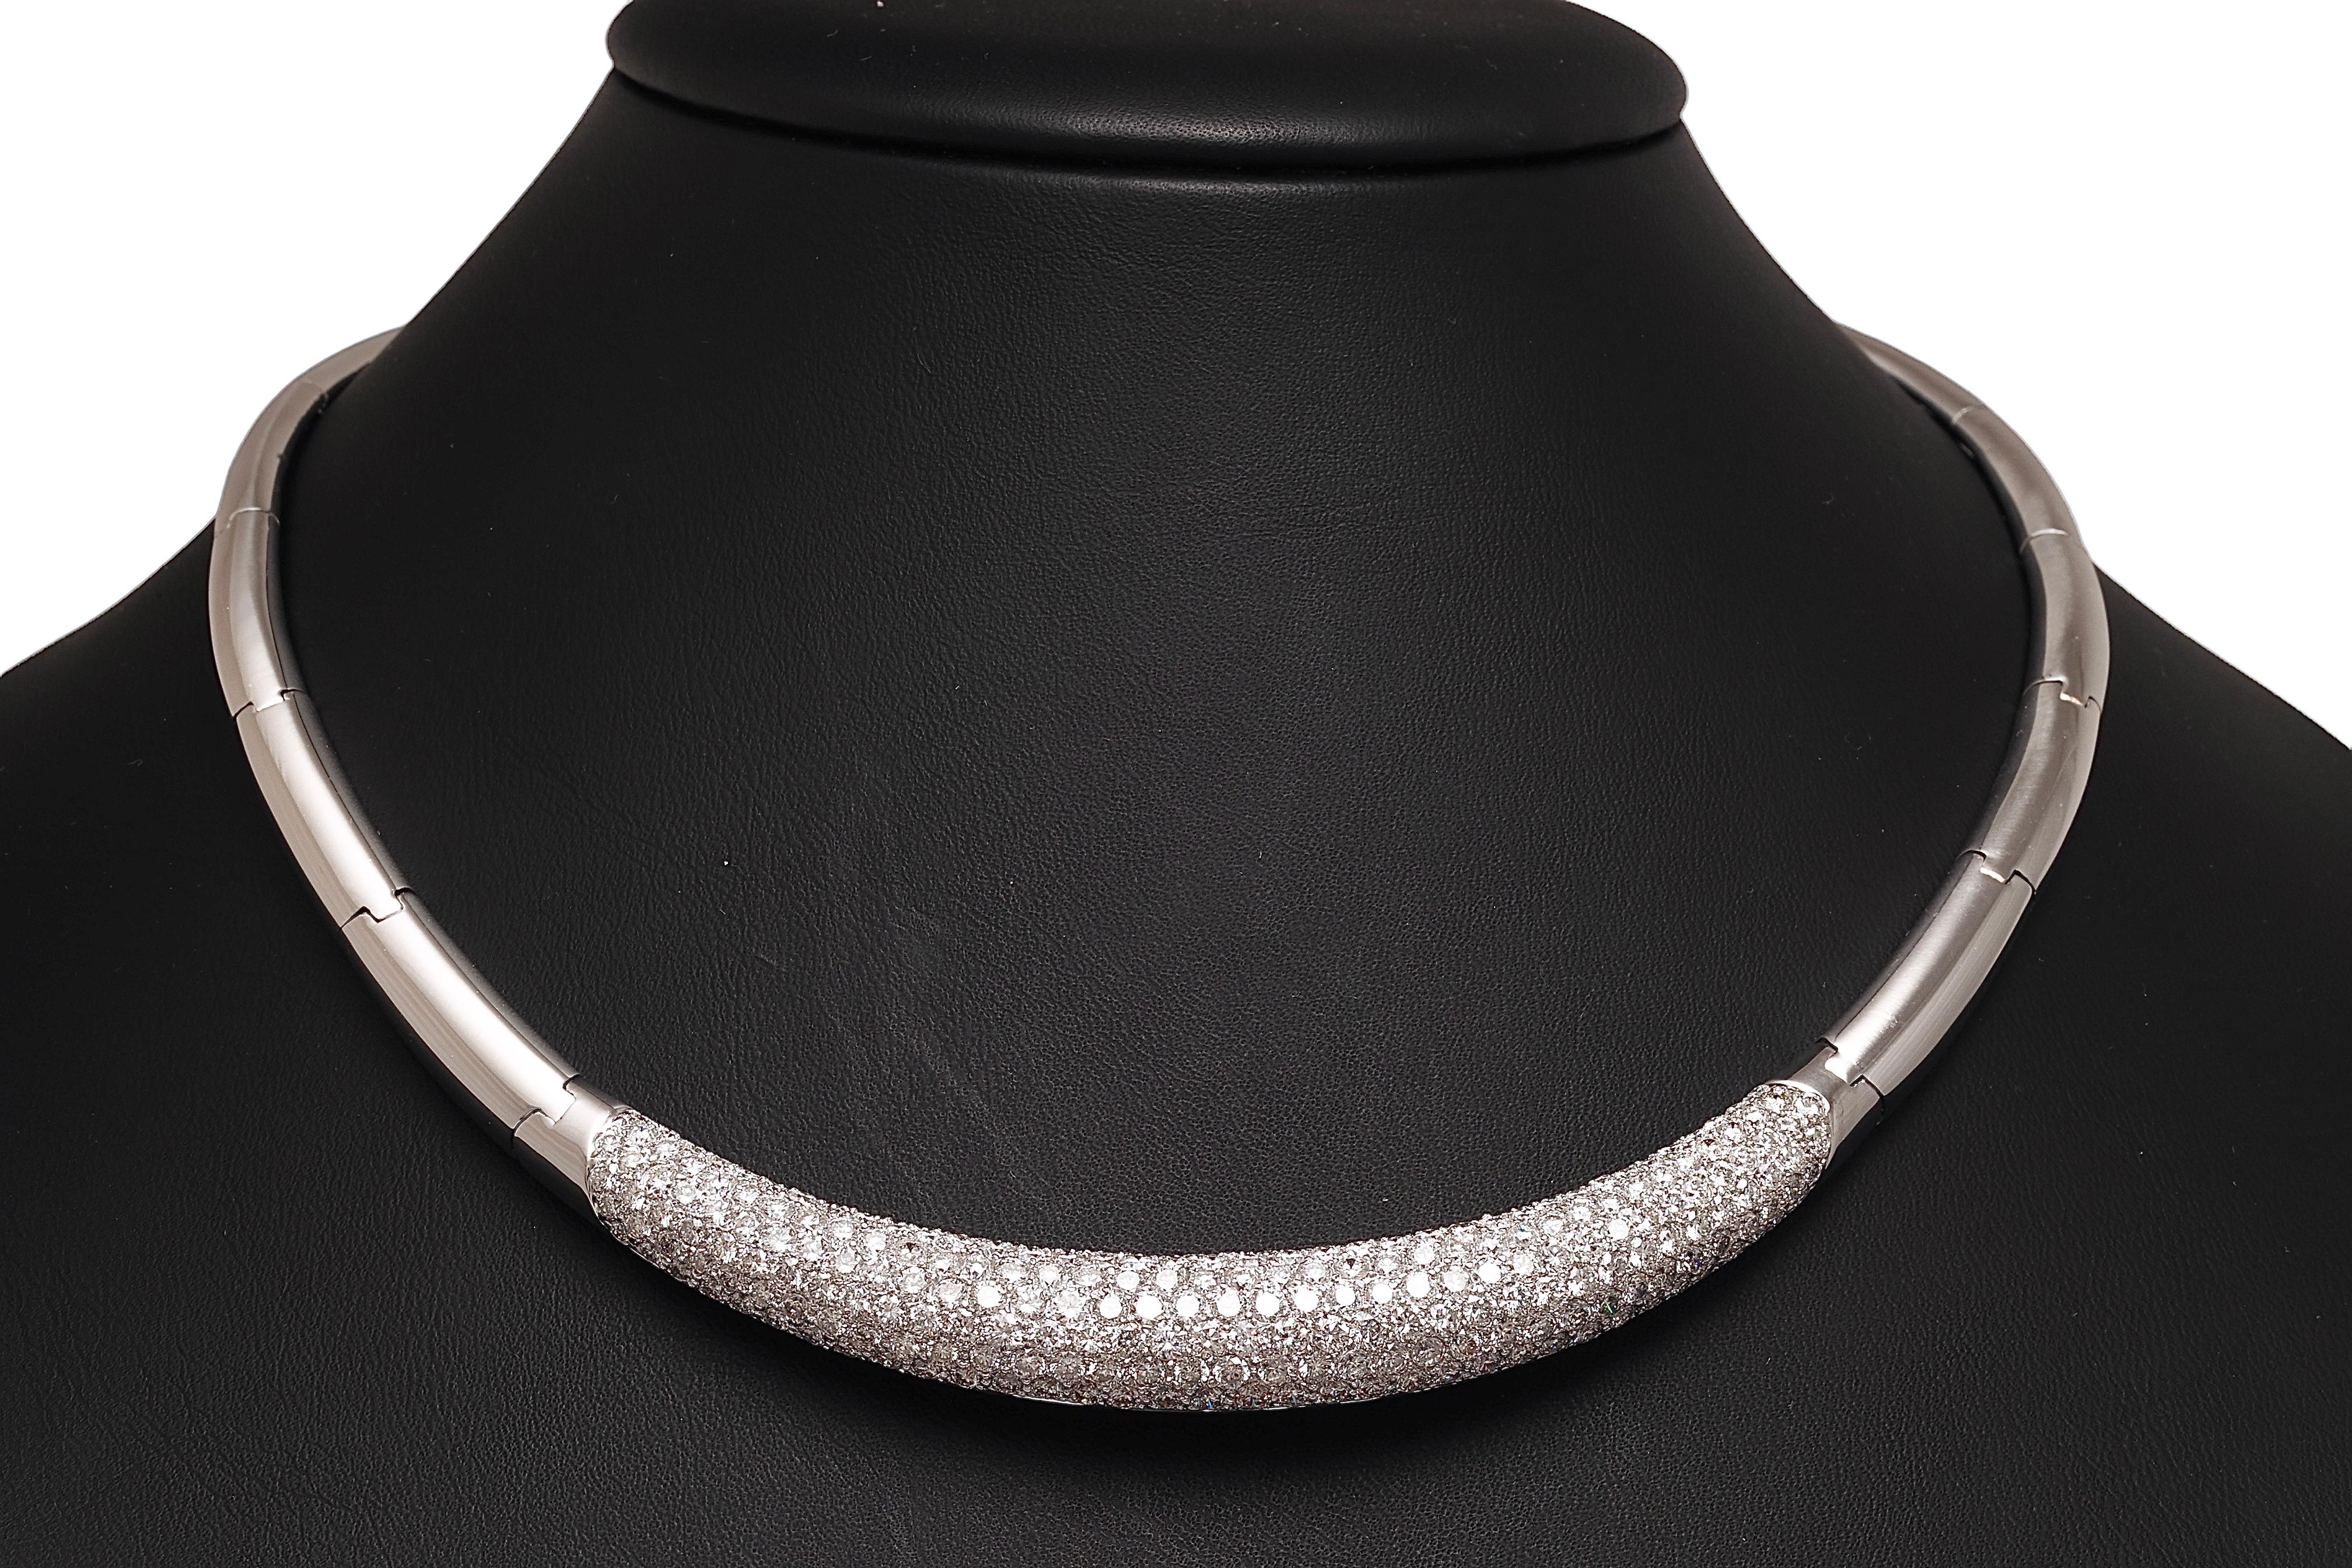 Magnificent 18 kt. White Gold Choker Necklace With 9.95 ct. Brilliant cut Diamonds

Diamonds: Brilliant cut diamonds, together approx. 9.95 ct. E Color VVS/ Loupe Clean

Material: 18 kt. white gold

Measurements: approx. 39 cm long

Total weight: